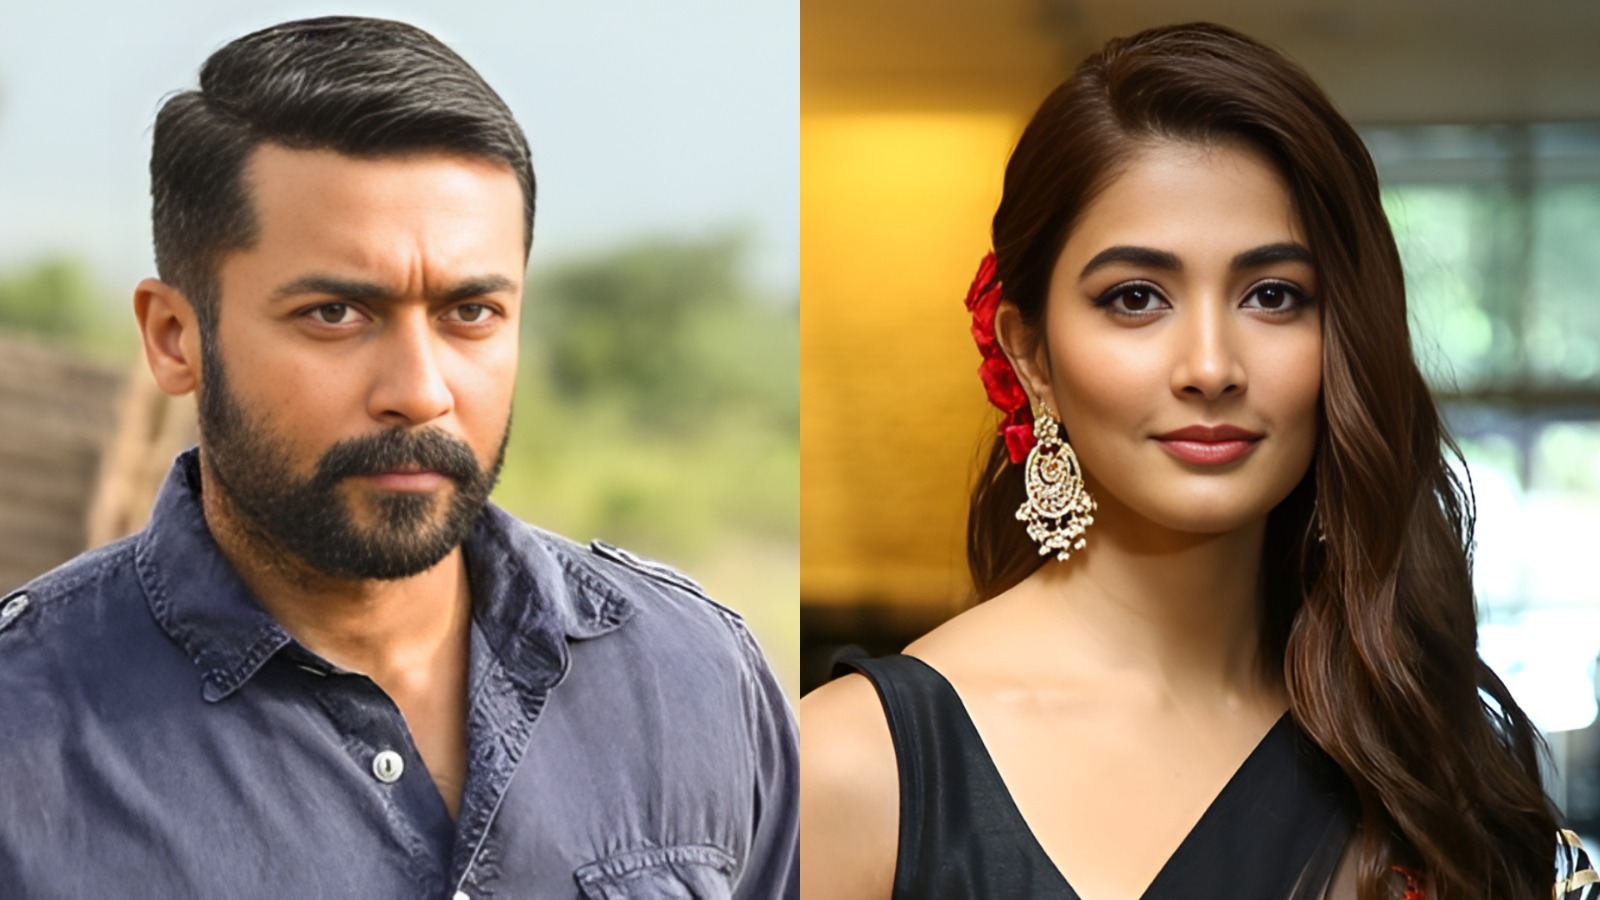 Pooja Hegde to Star Opposite Suriya in His 44th Film, Malayalam Actor Too Joins the Cast